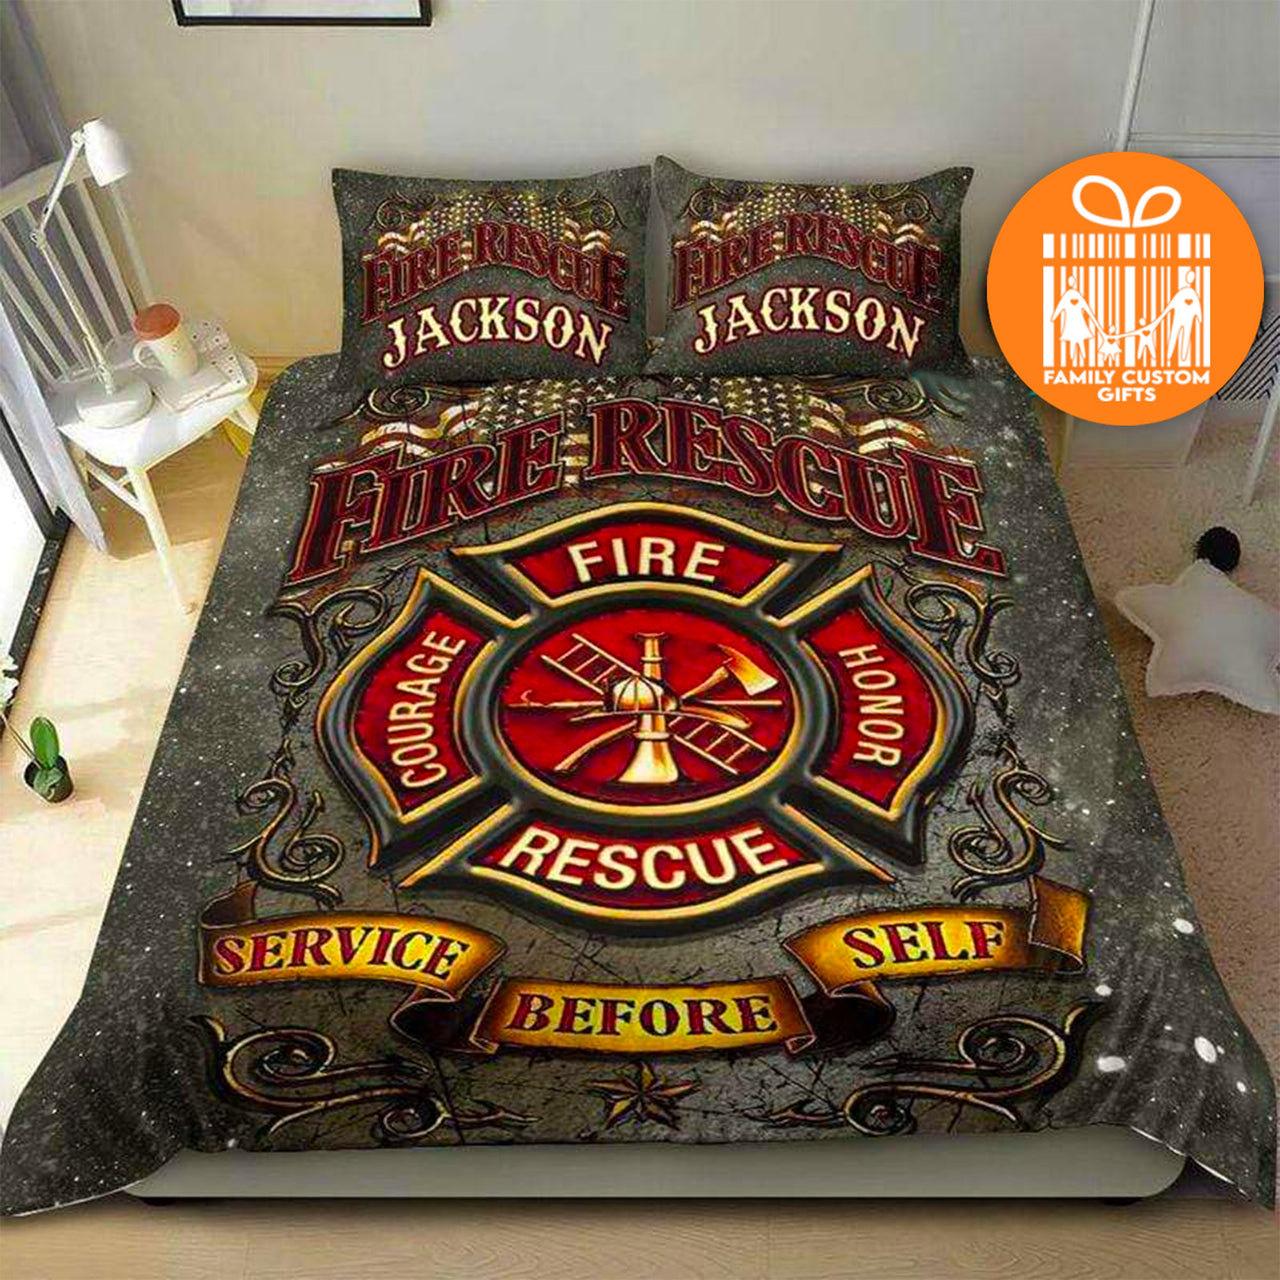 Comforter Fire Rescue Firefighter Custom Bedding Set for Kids Teens Adult Personalized Premium Bed Set